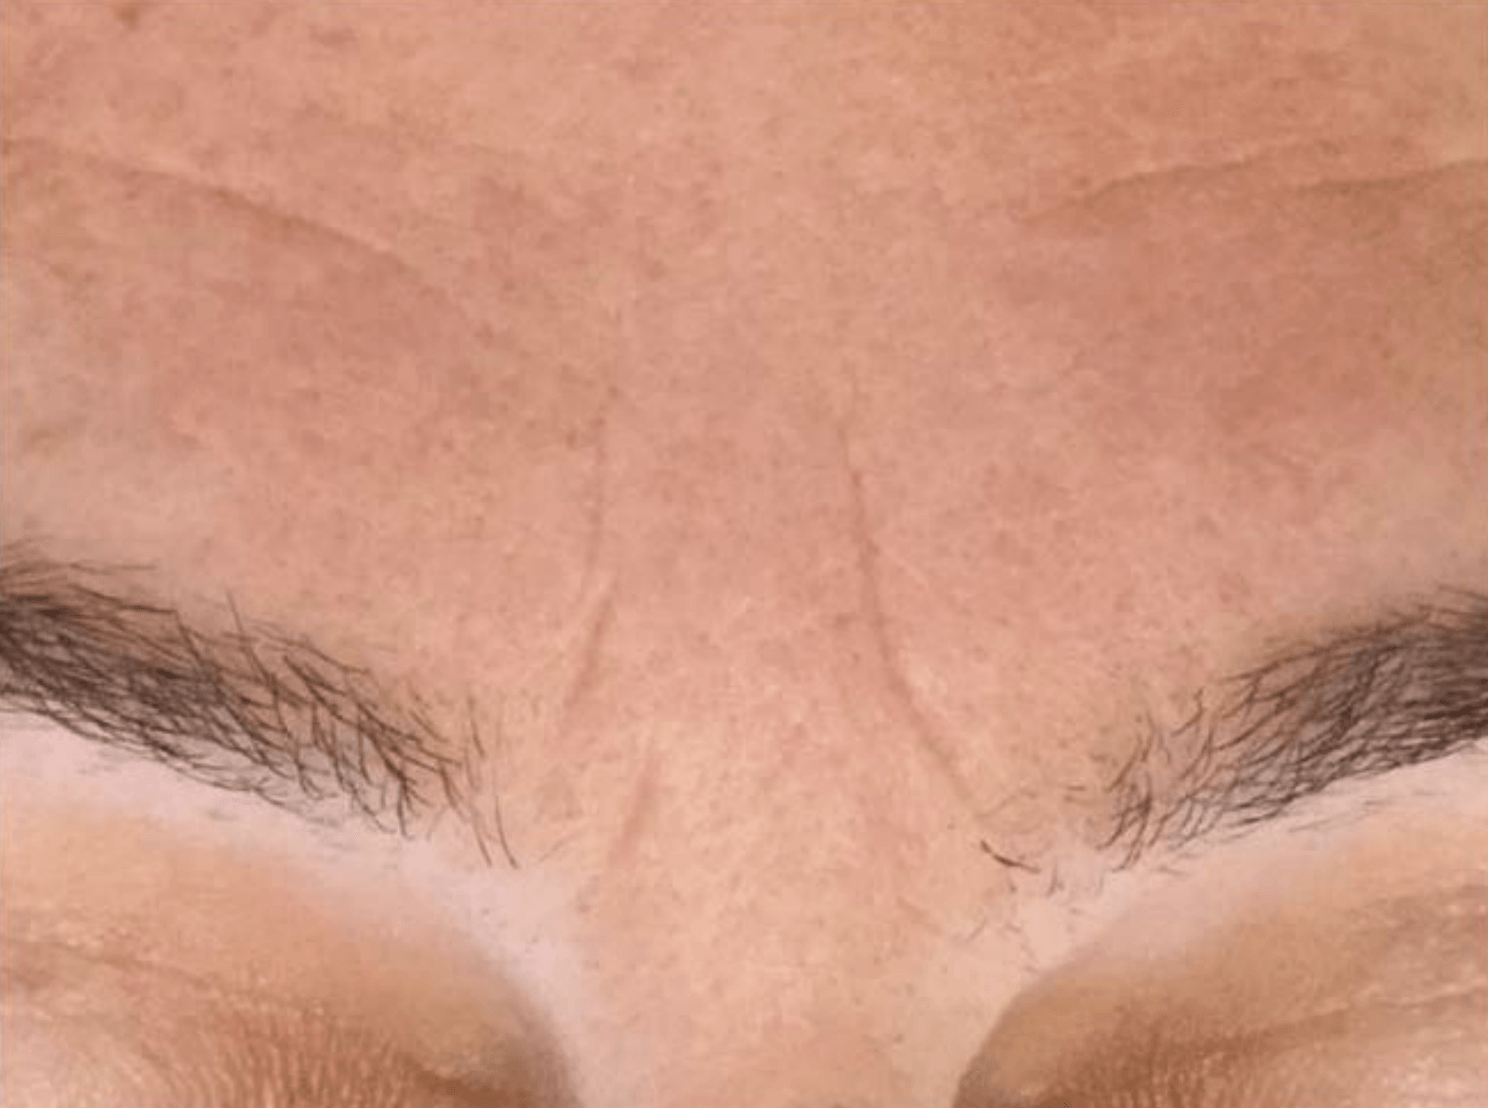 A close up of a woman 's forehead with wrinkles and eyebrows.